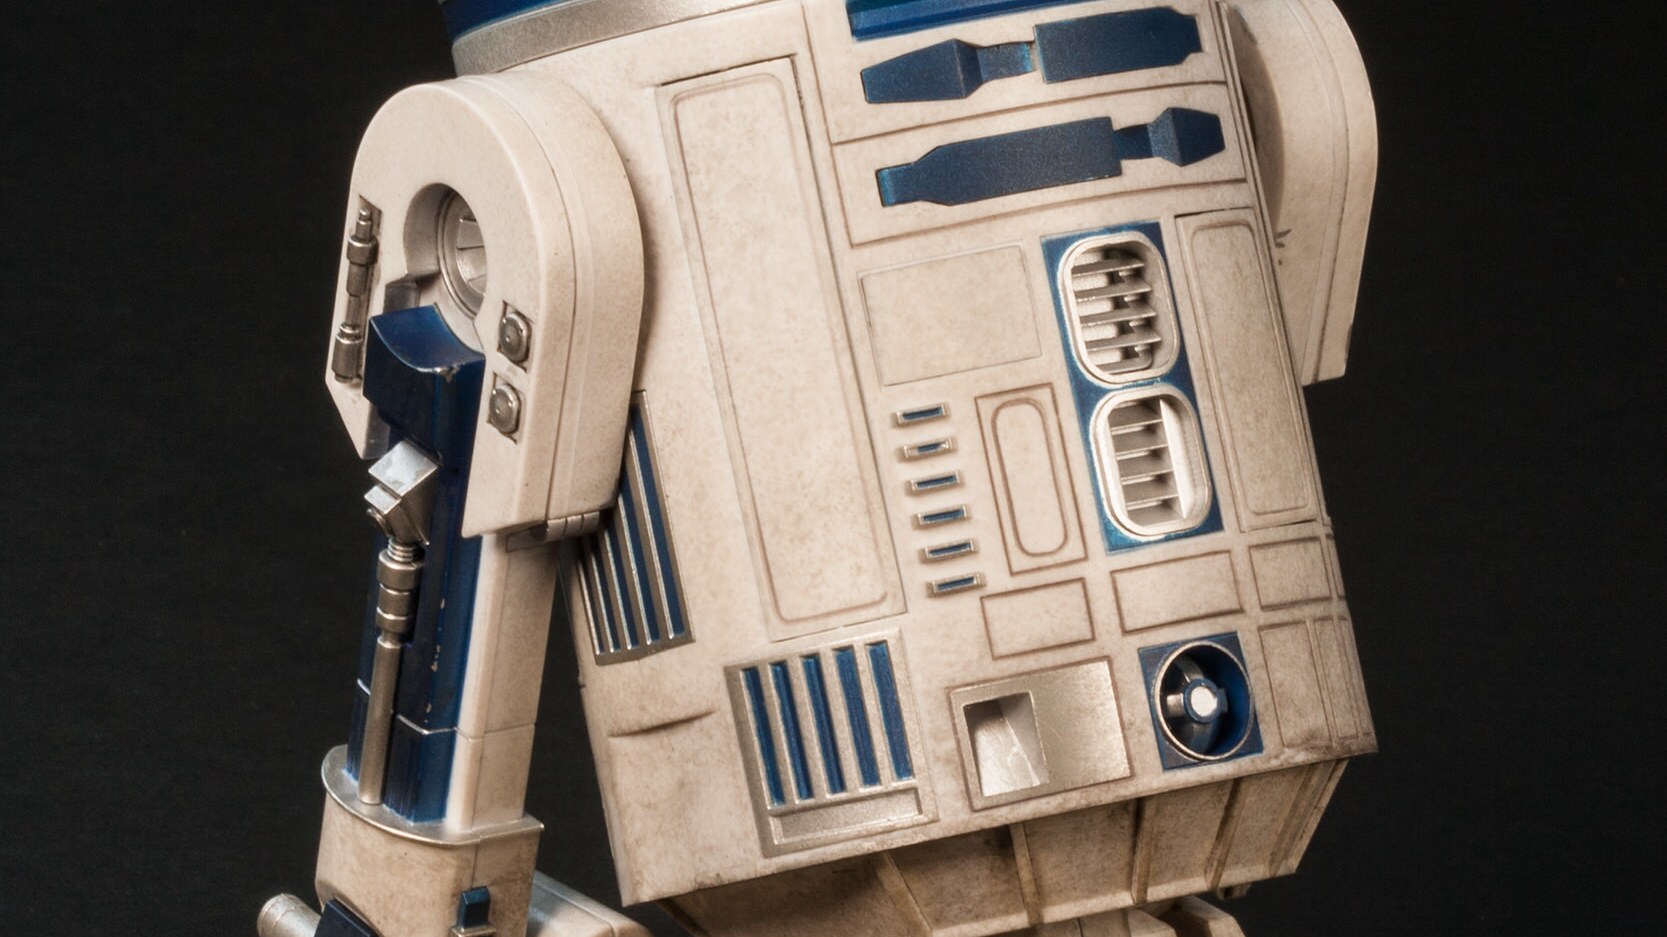 Sideshow Collectibles: Building a Better R2-D2